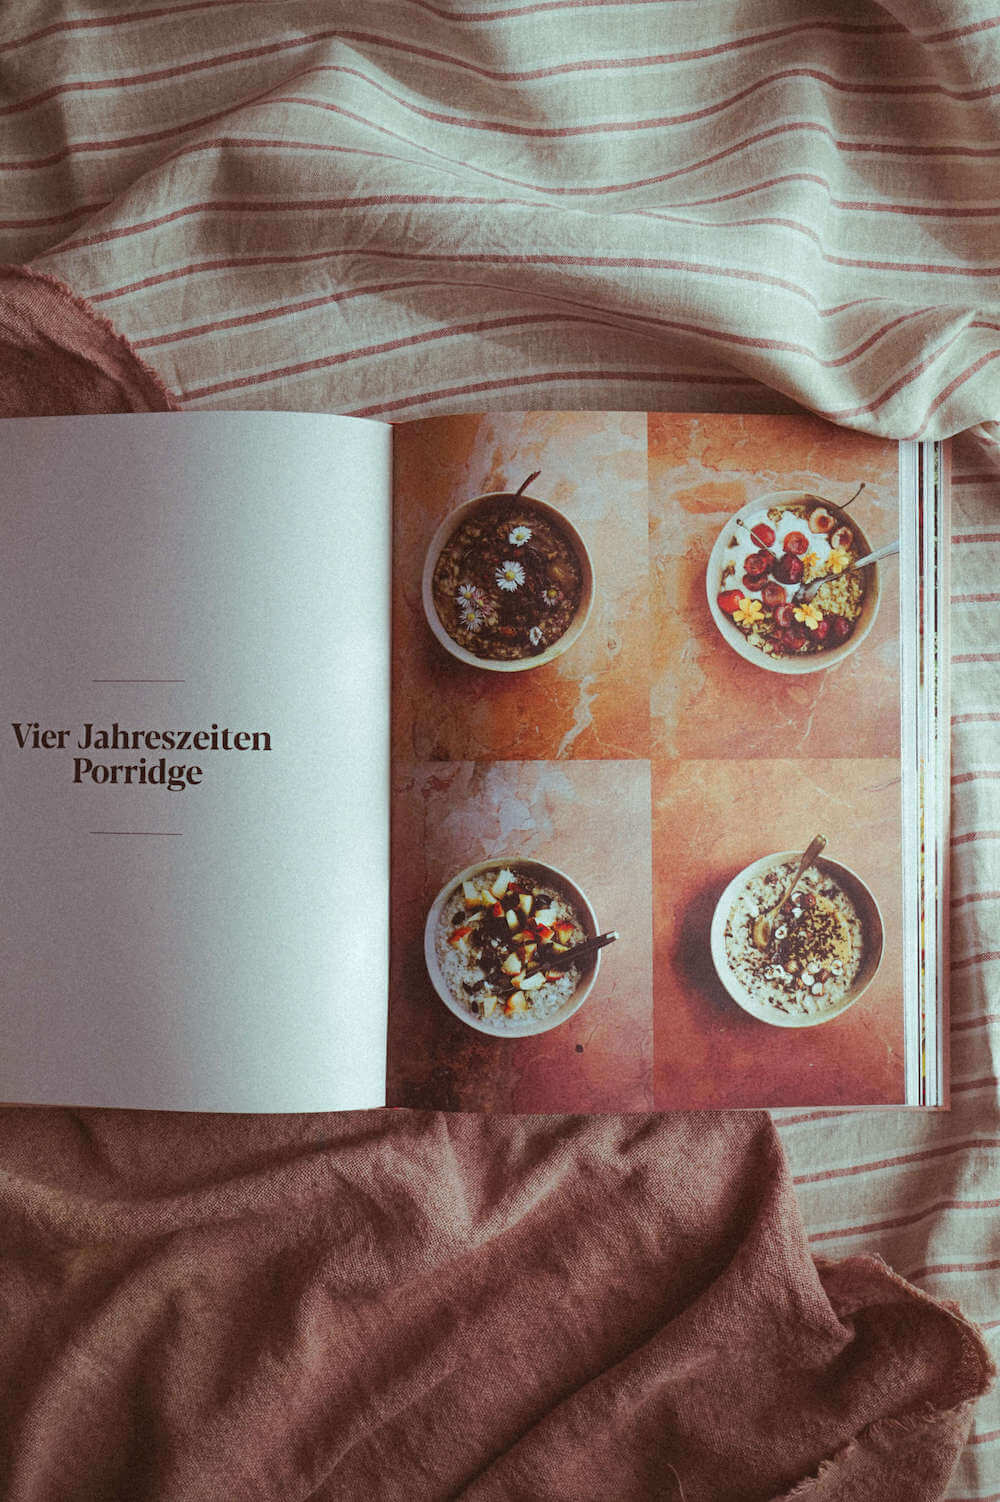 Preview: Cookbook & Coffee Table Book For Food & Love